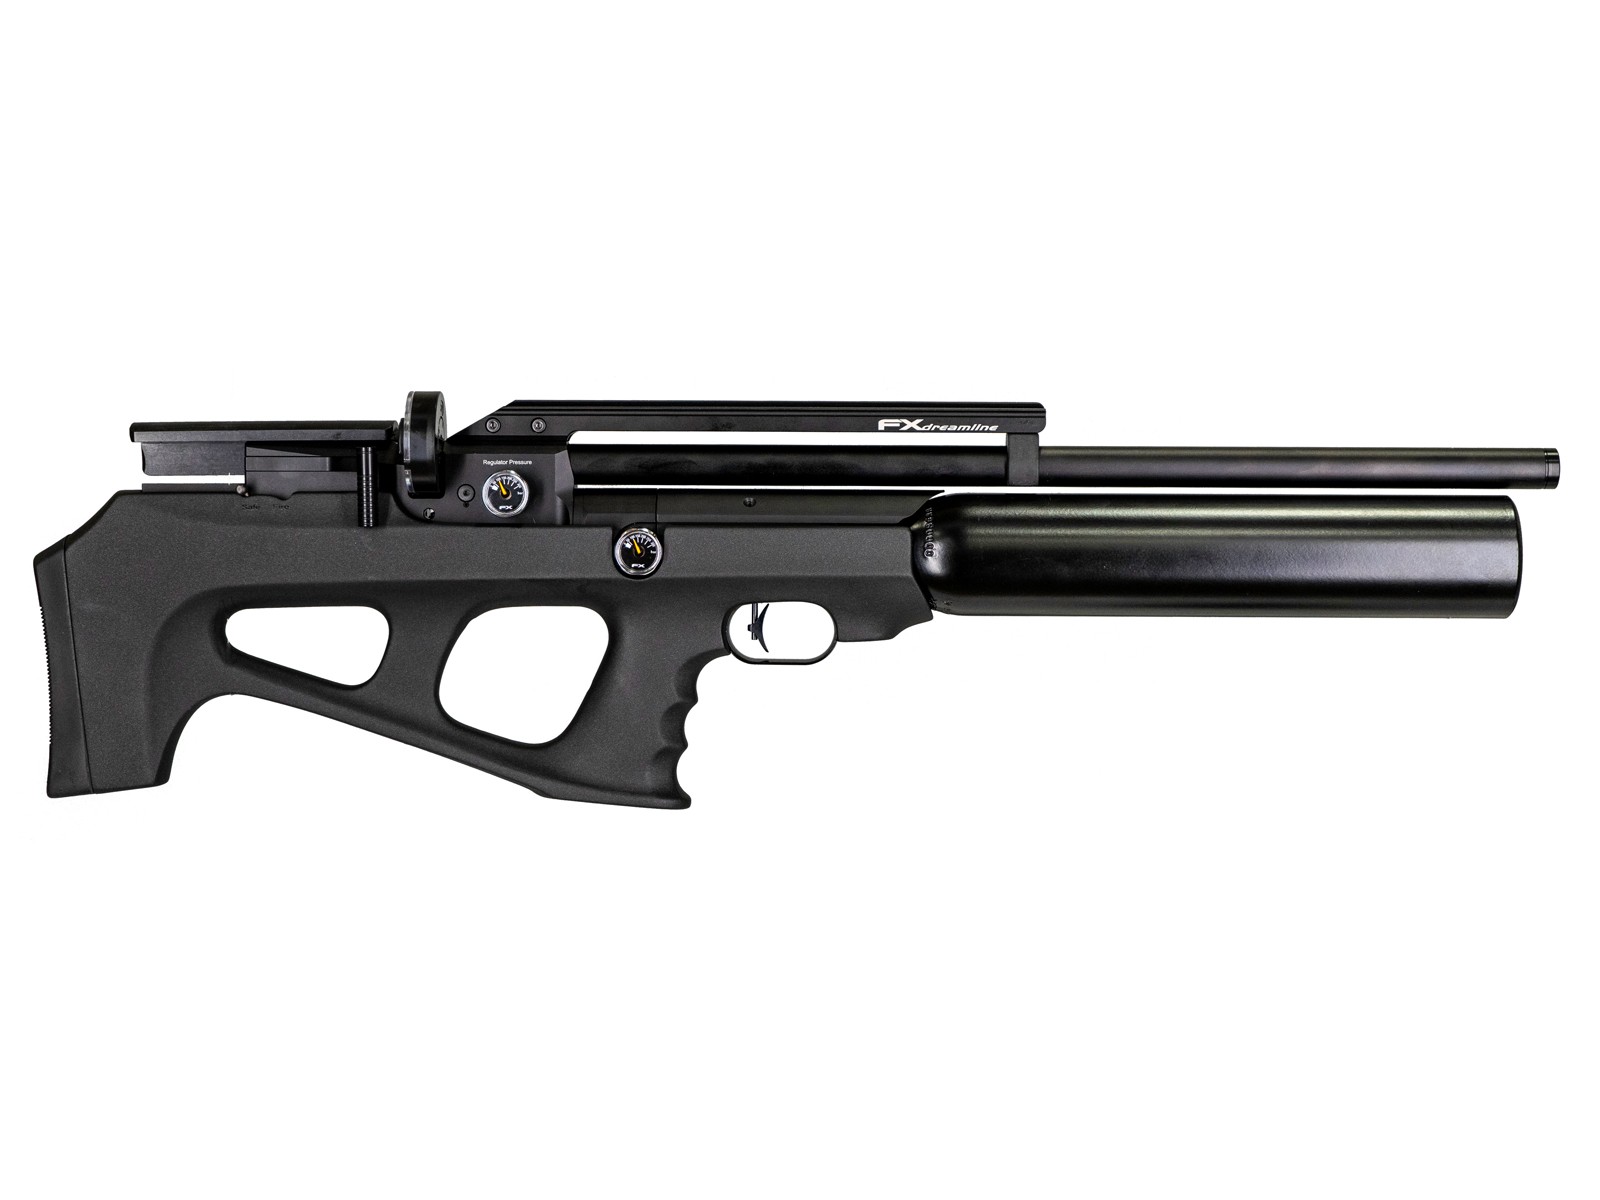 Fx Dreamline Dream Pup Bottle Pcp Bullpup Rifle With Aluminum Air Cylinder Synthetic Stock 6985